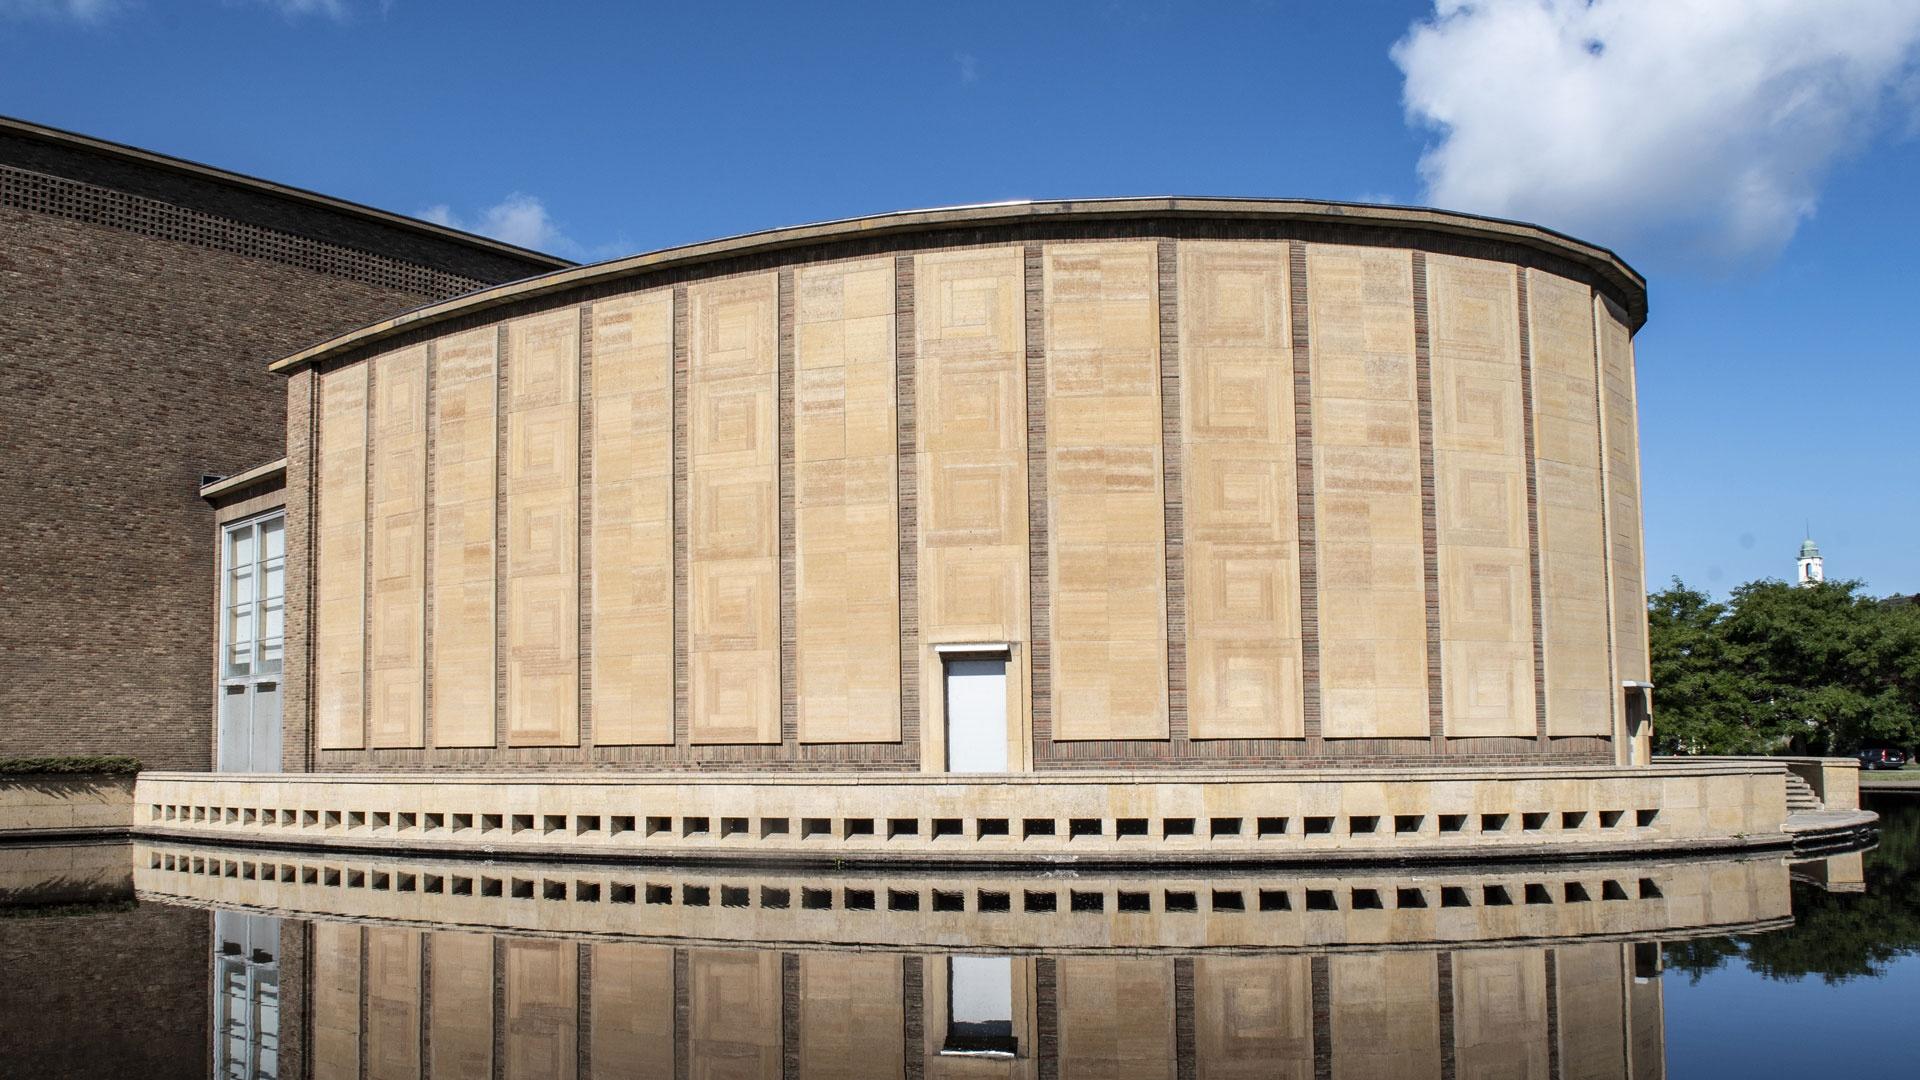 Kleinhans Music Hall as it can be seen today